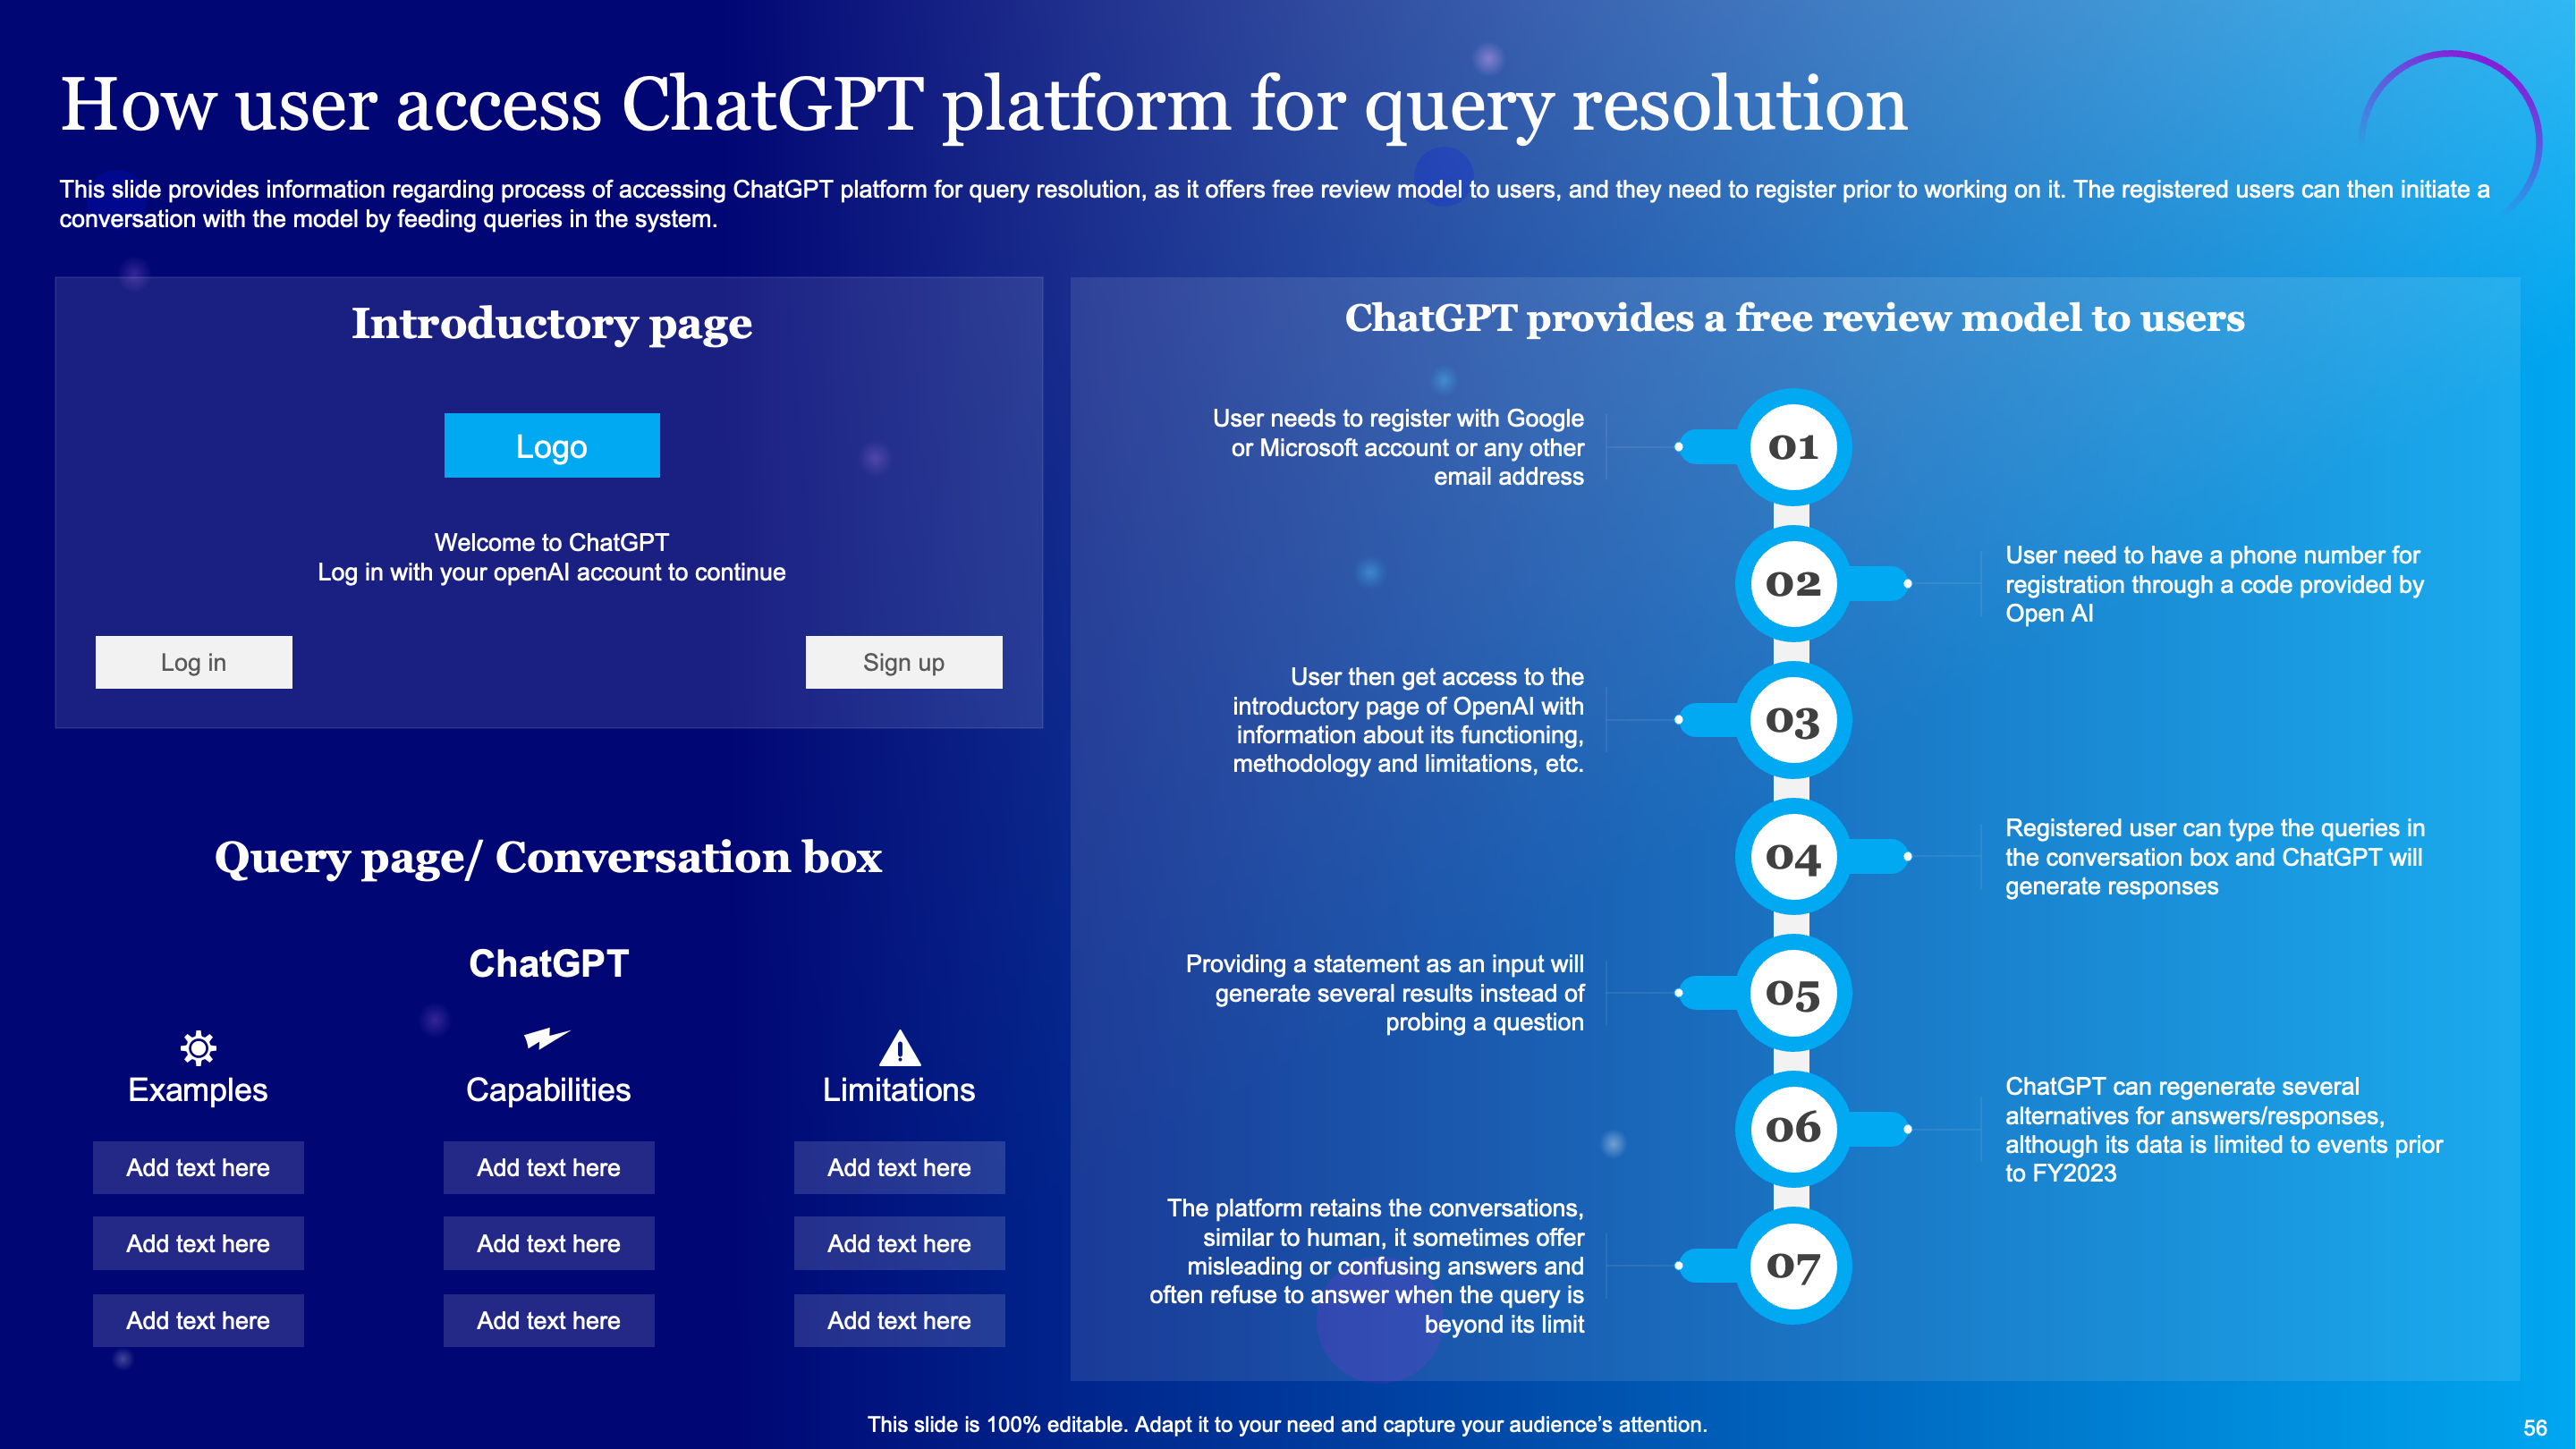 How User Access ChatGPT for Query Resolution